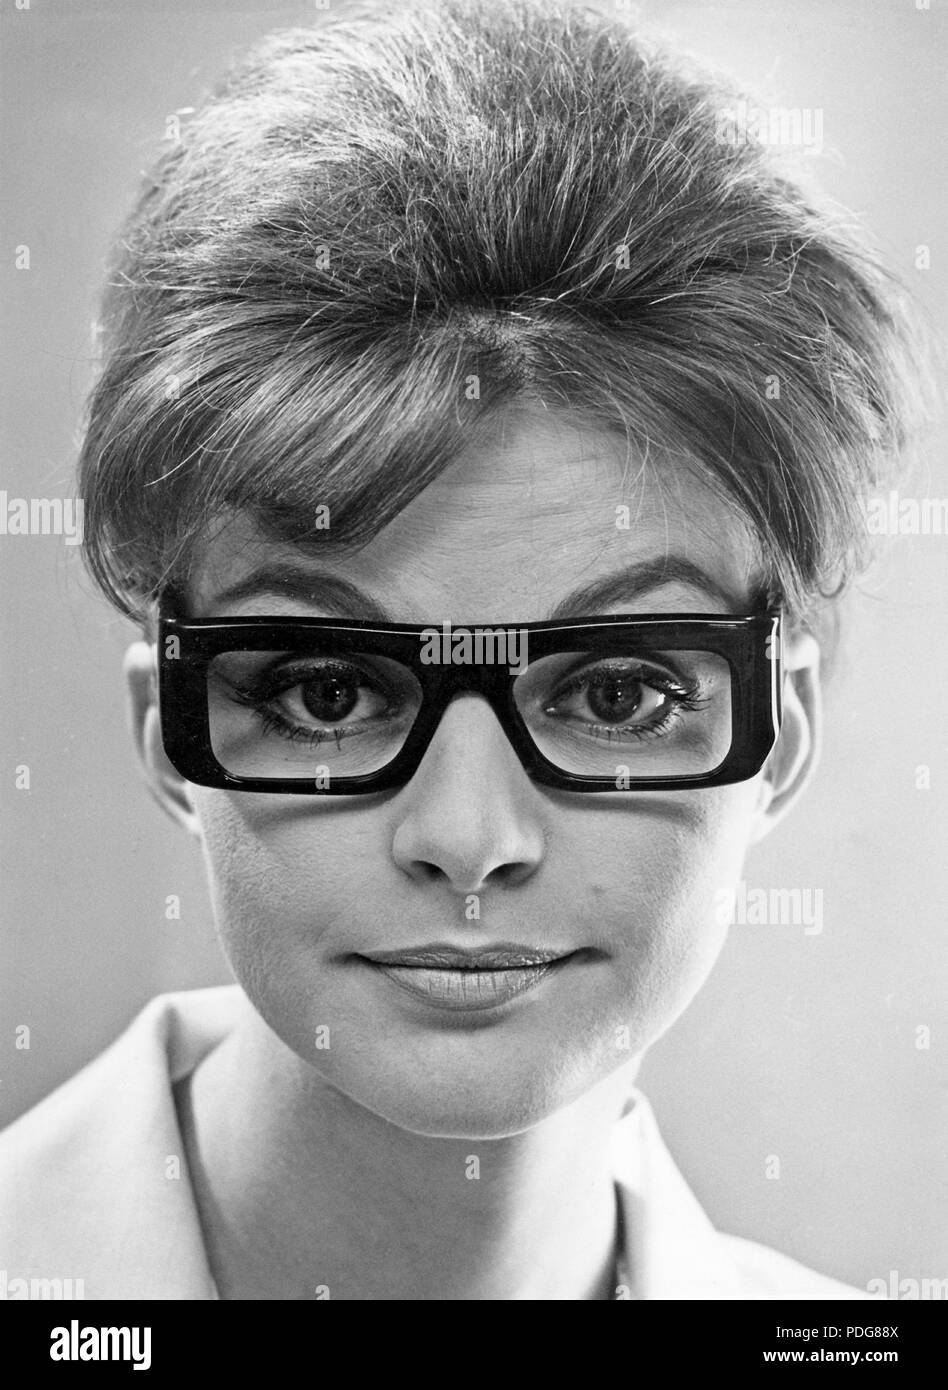 1960s glasses. A young woman in glasses and bows 1963. Stock Photo